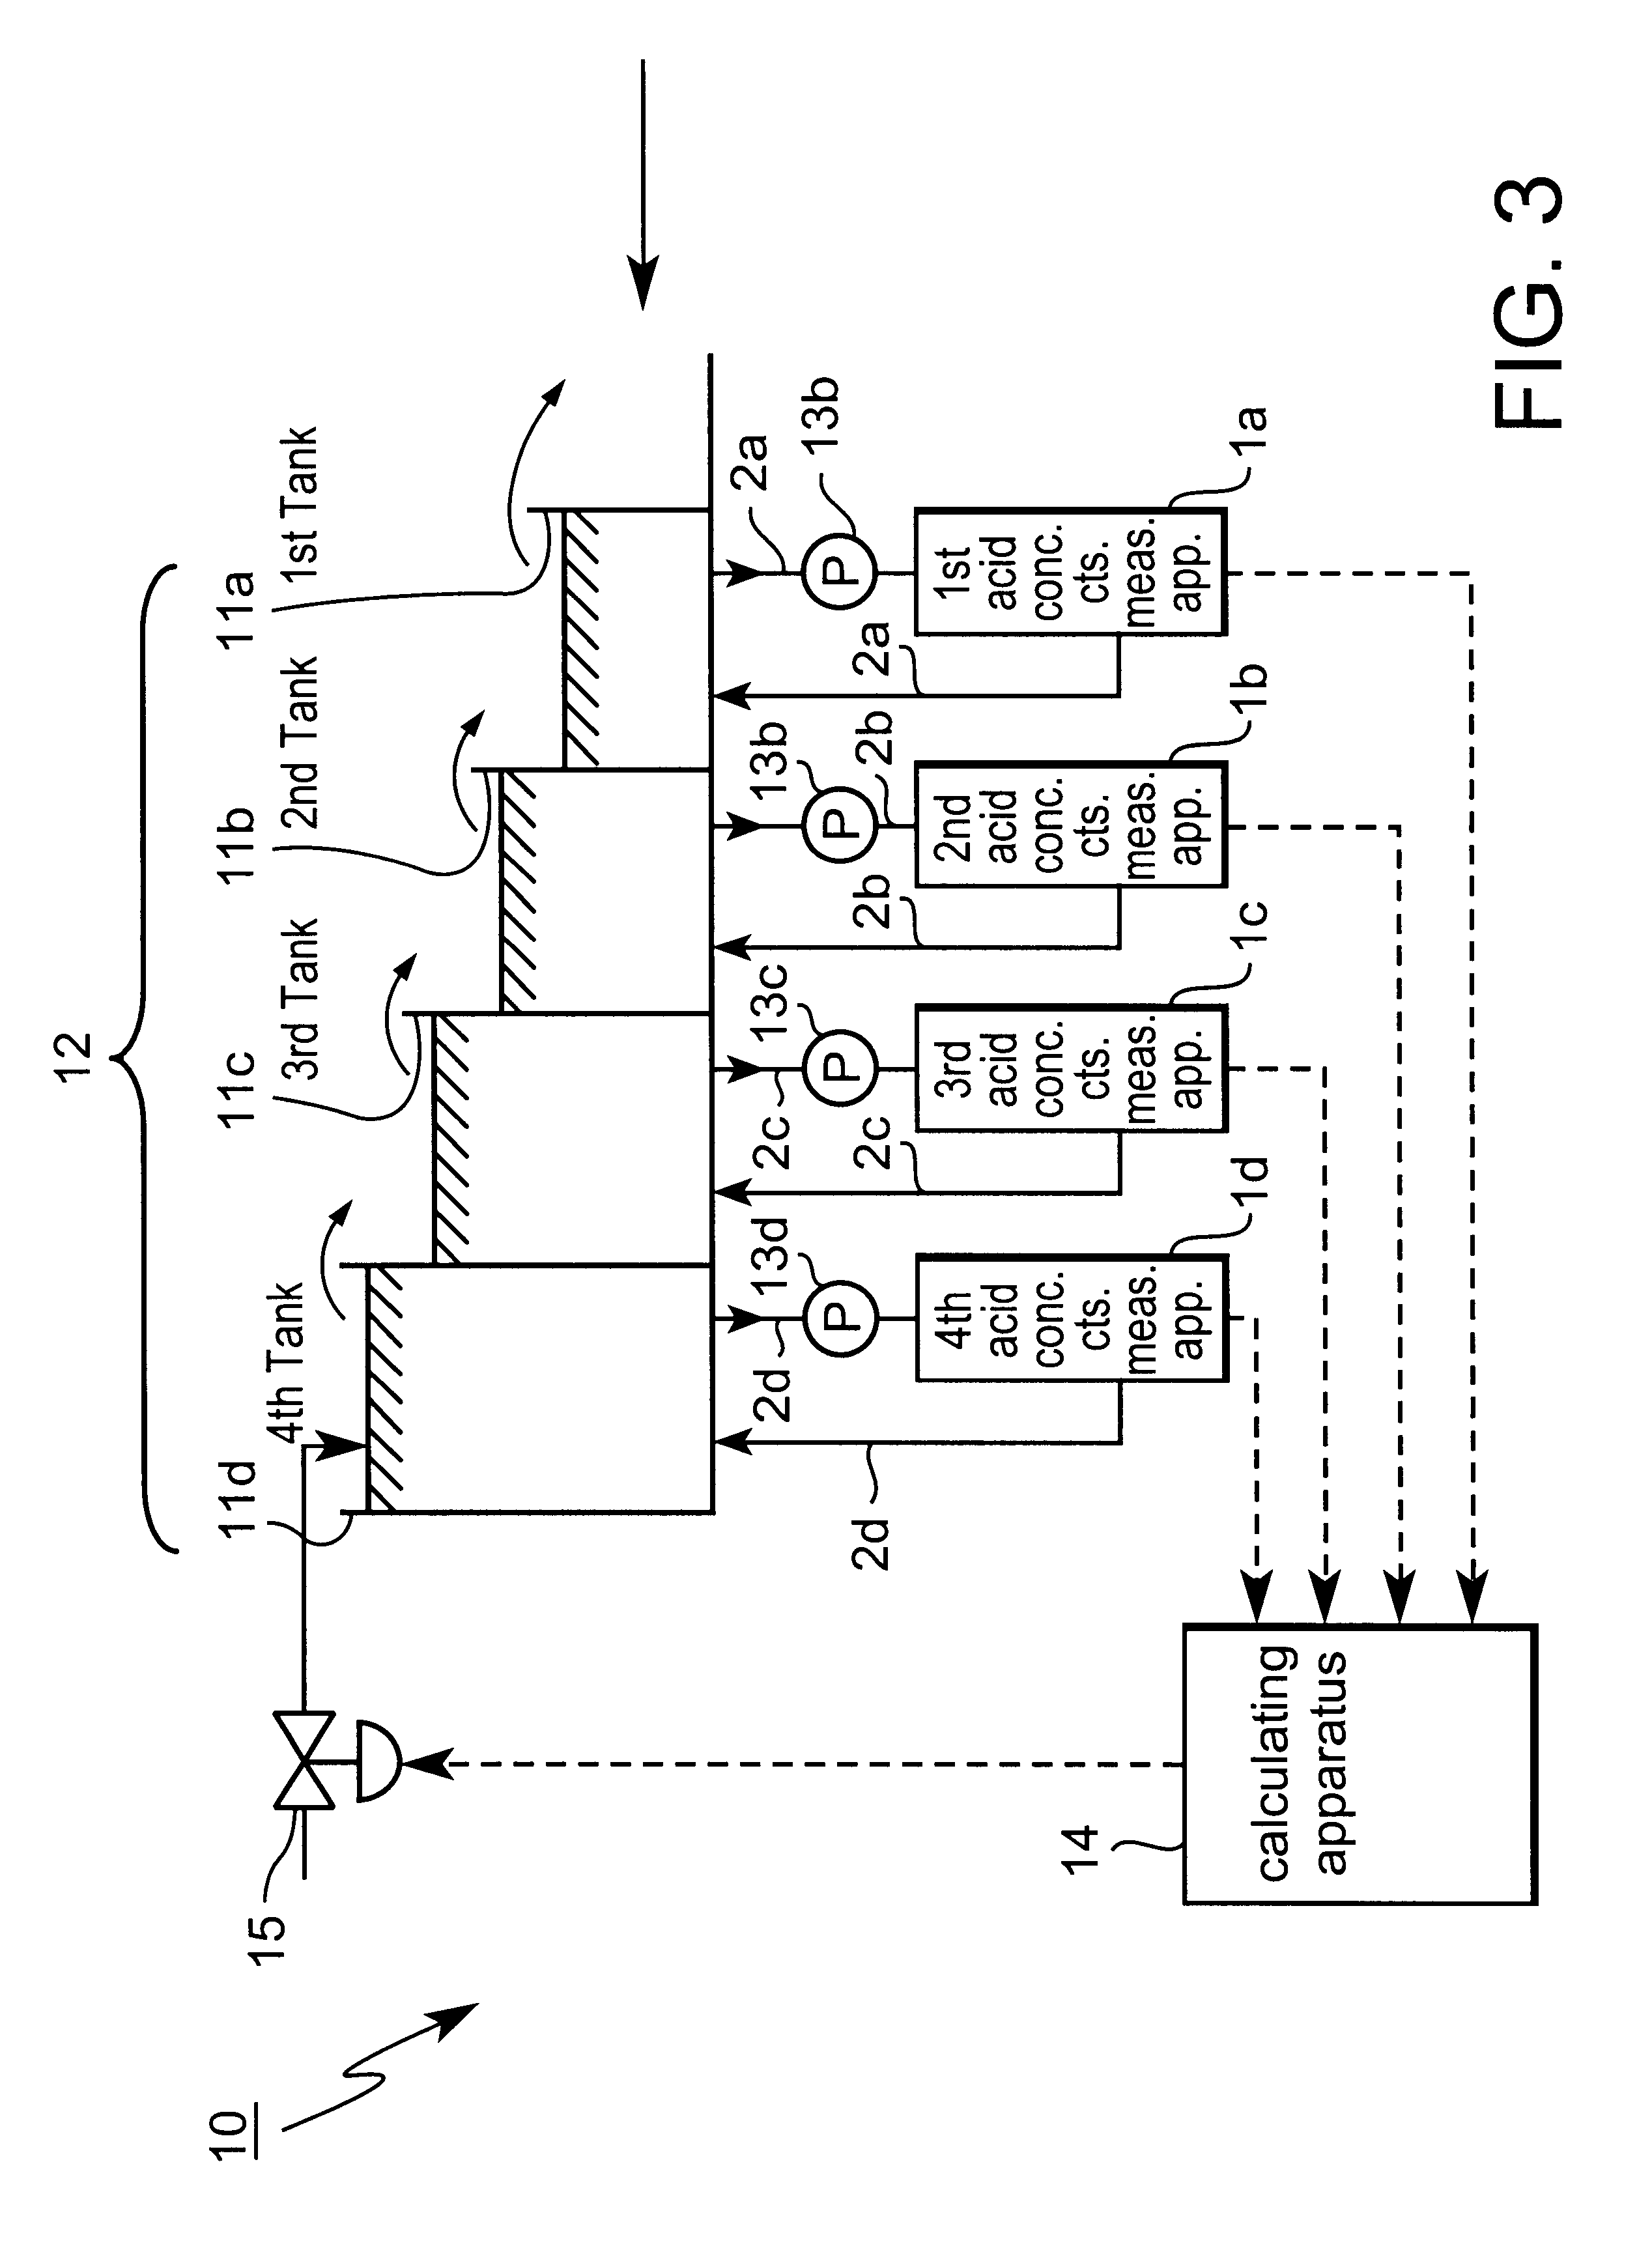 Method and apparatus for measurement and automatic control of acid concentration